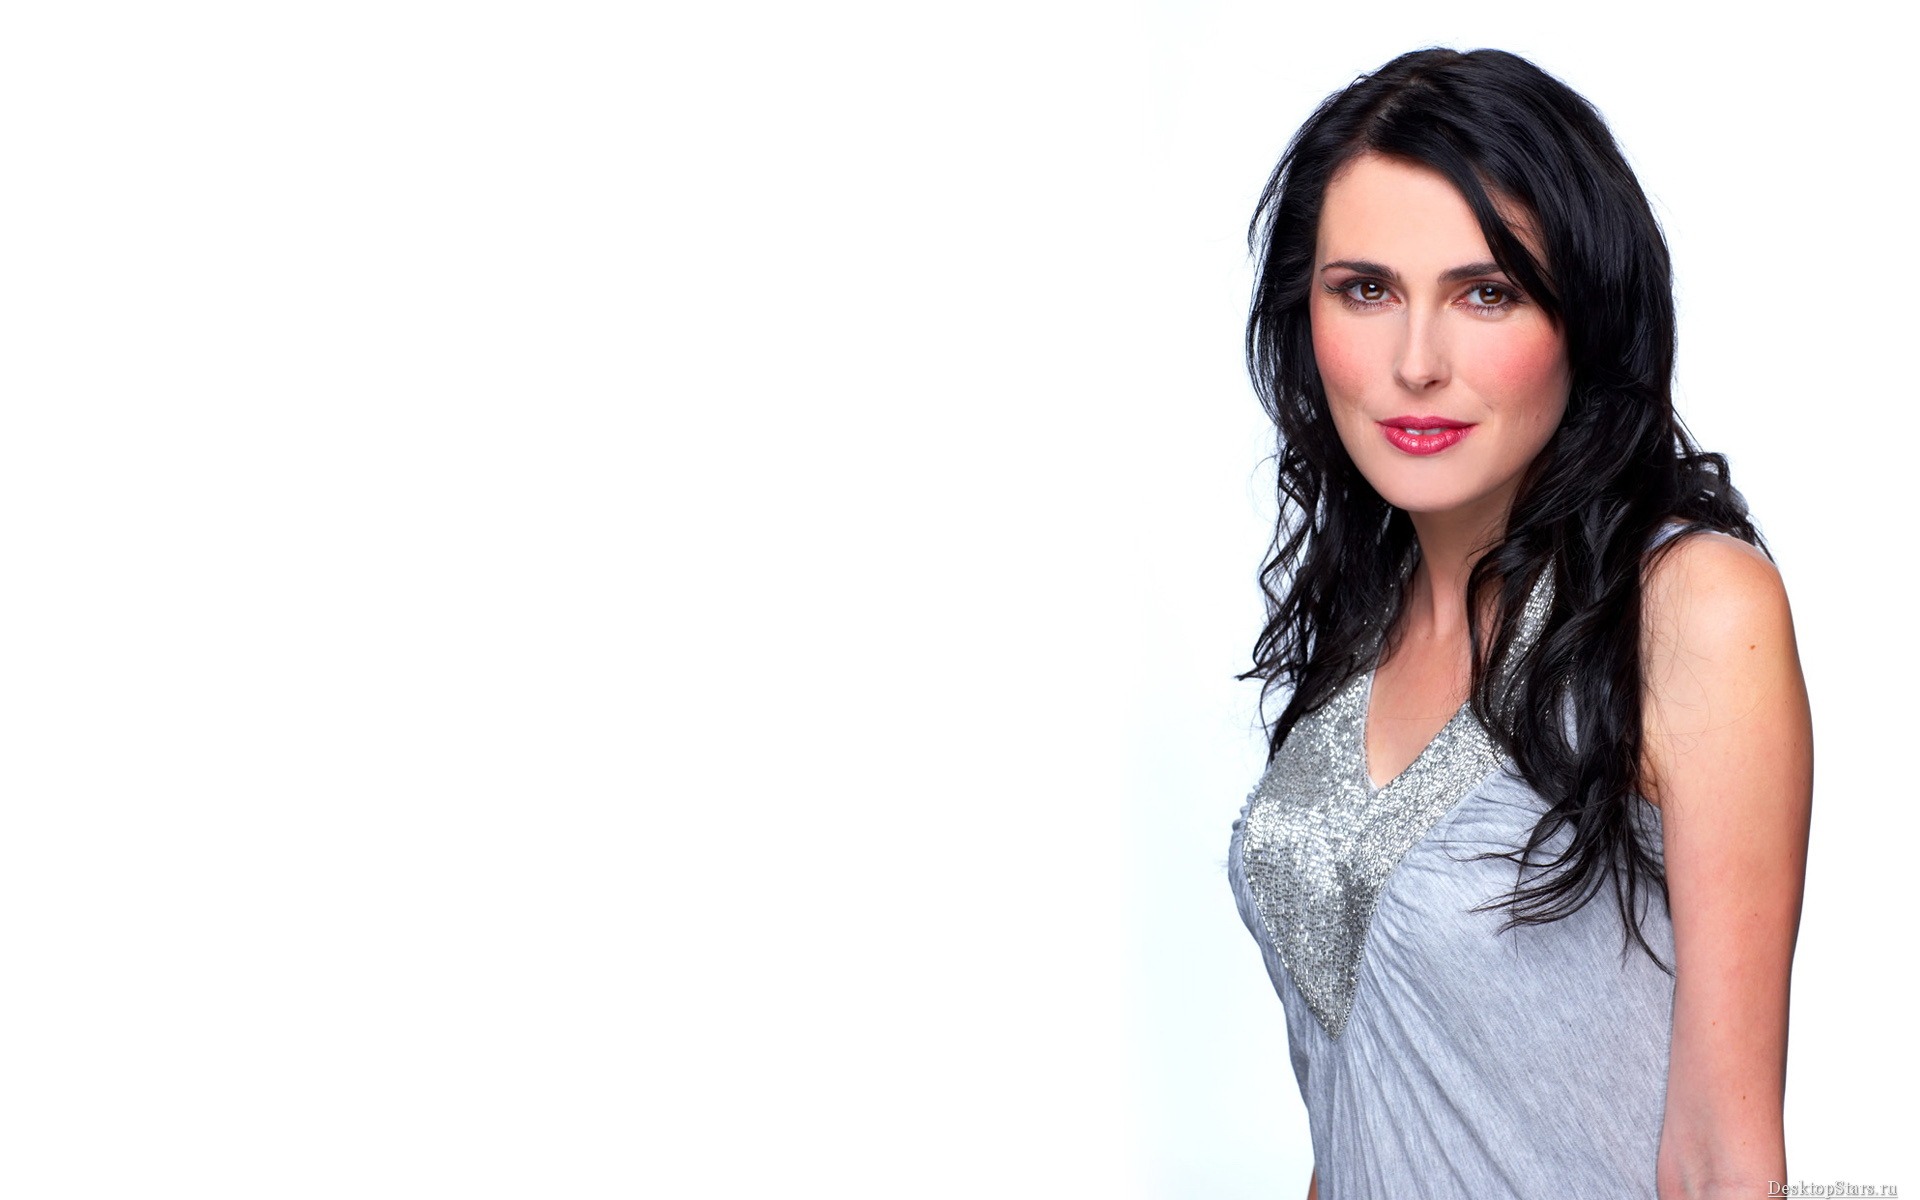 Sharon den Adel #007 - 1920x1200 Wallpapers Pictures Photos Images